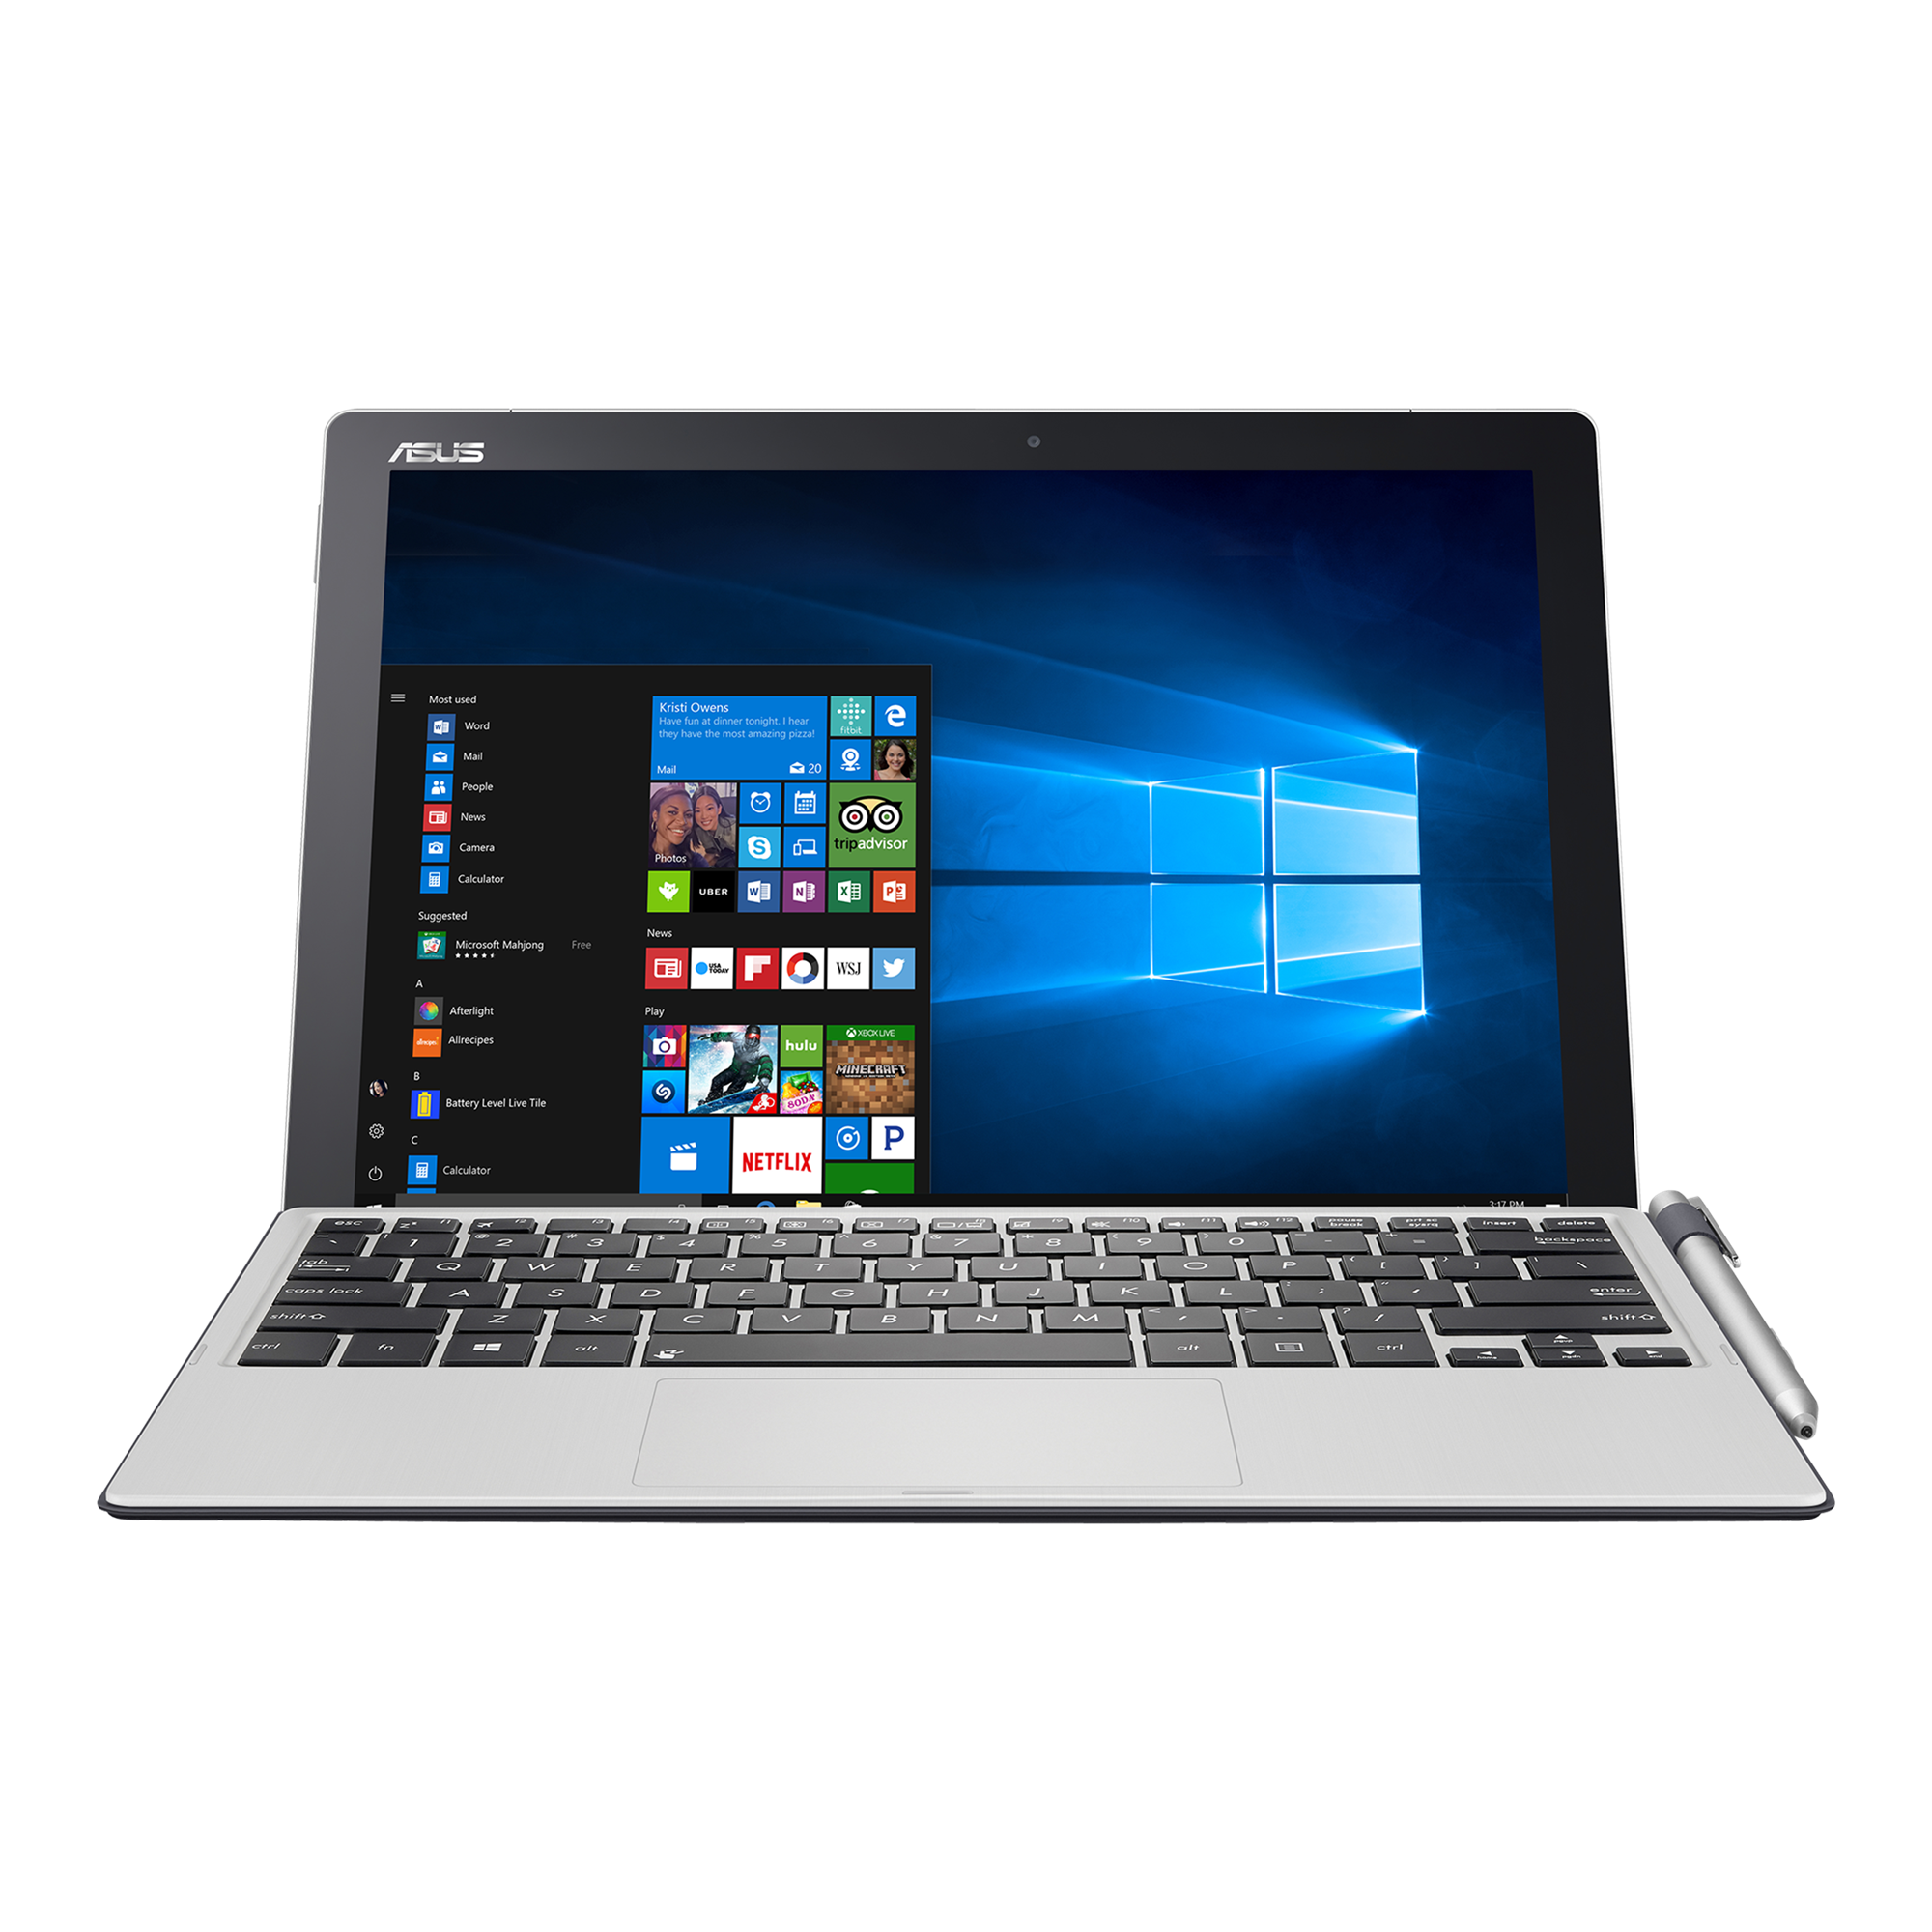 ASUS Transformer Pro T304｜Laptops For Students｜ASUS Global